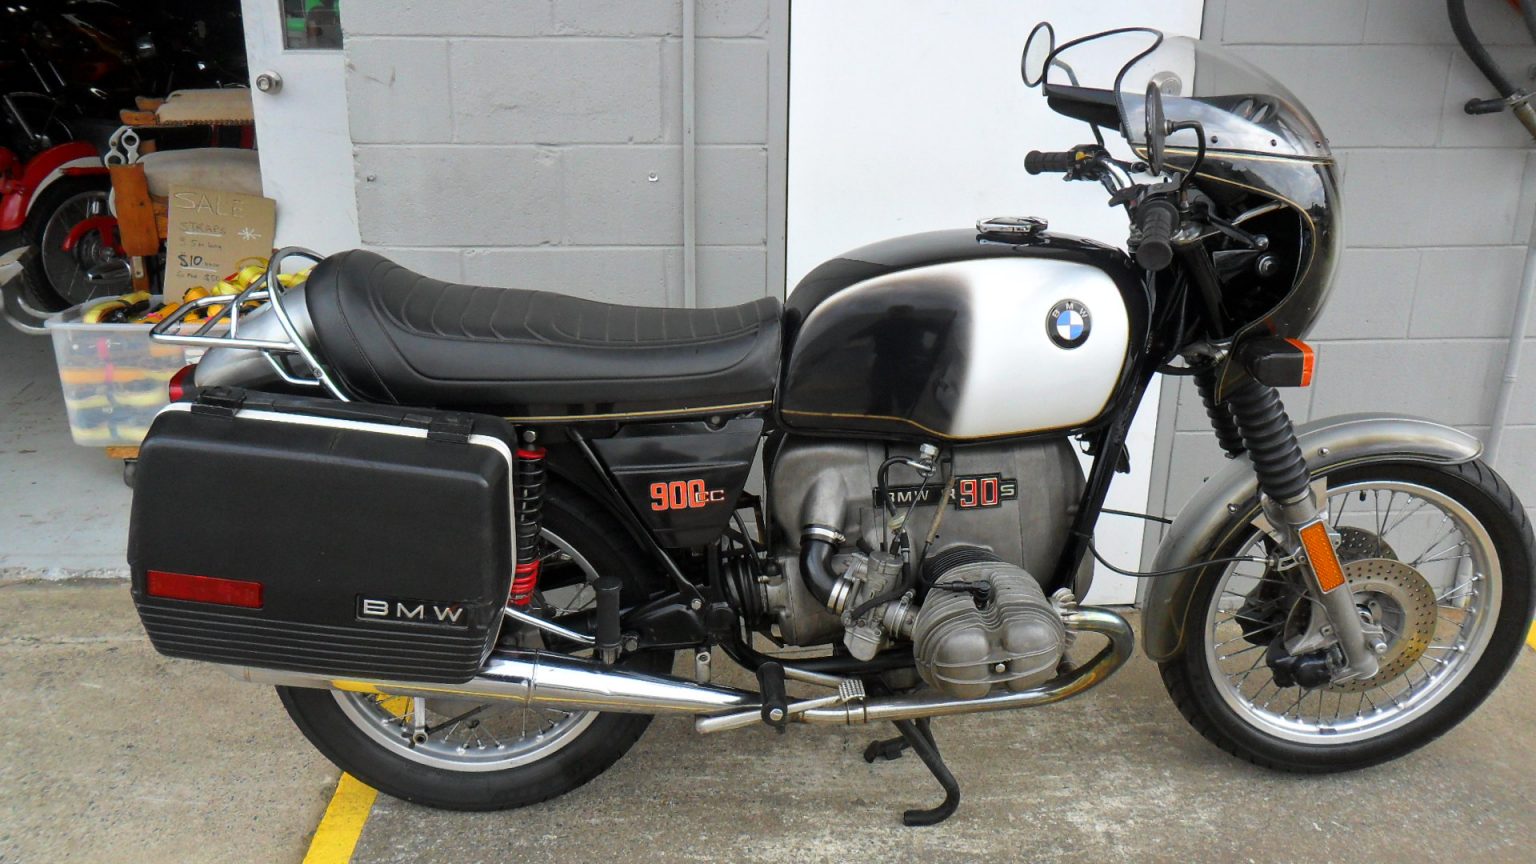 BMW R90S Silver Smoke late 1975 model, SOLD - Classic Motorcycle Sales